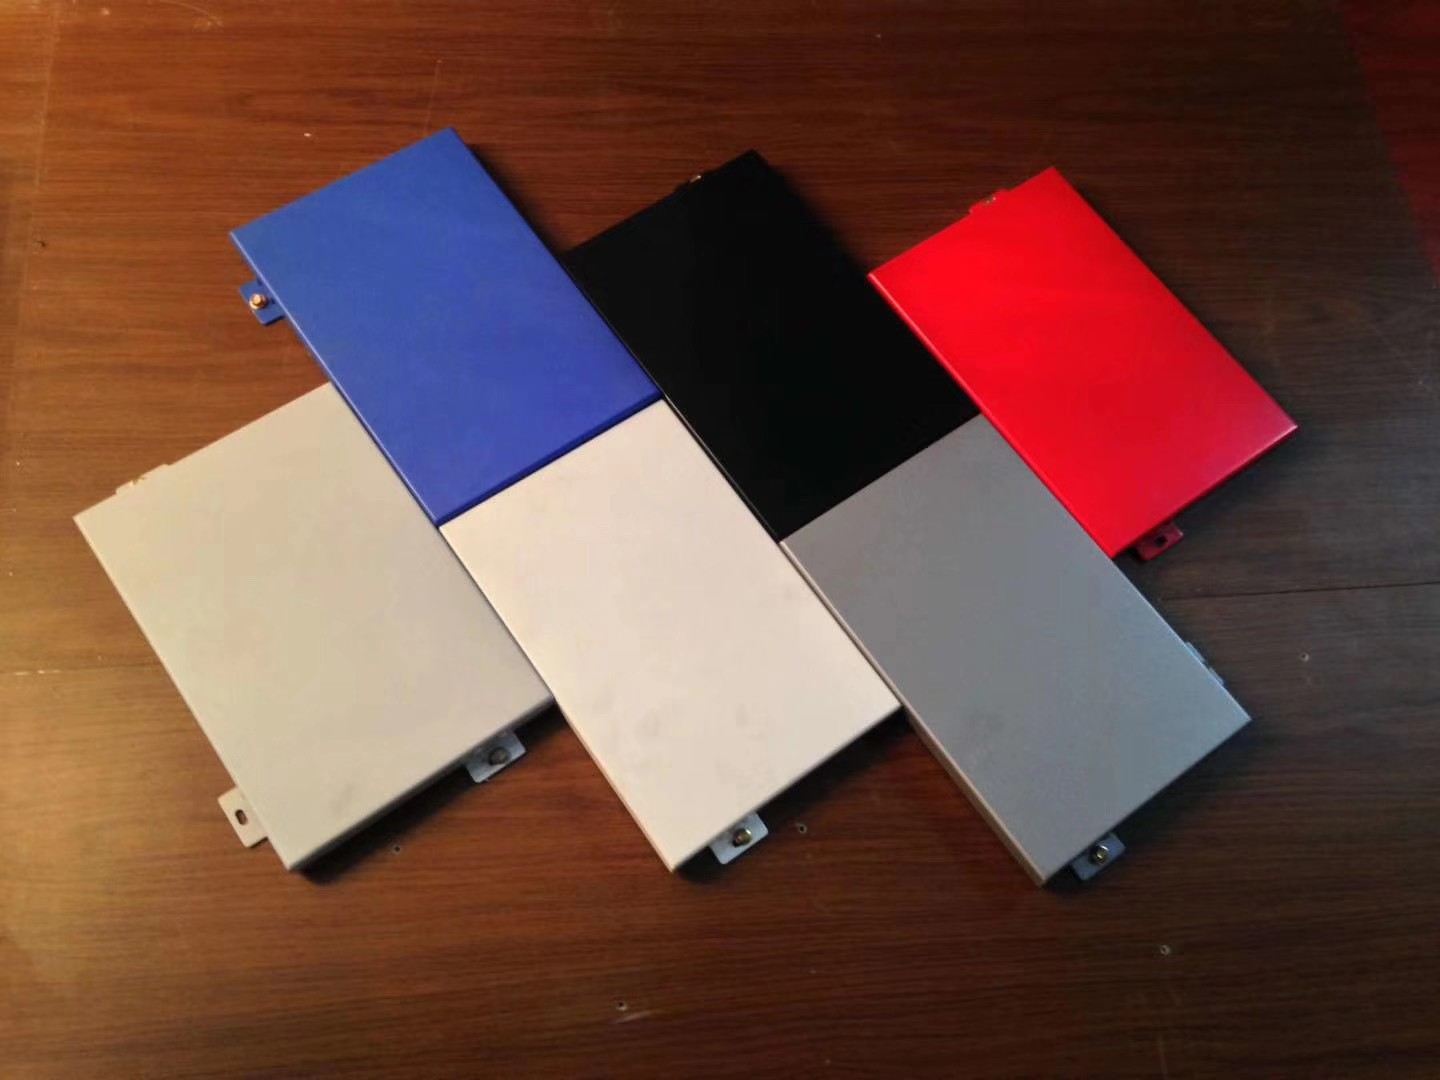 Quality OEM ODM 6mm 5000 6000 Series Pre Painted Aluminum Sheet for sale